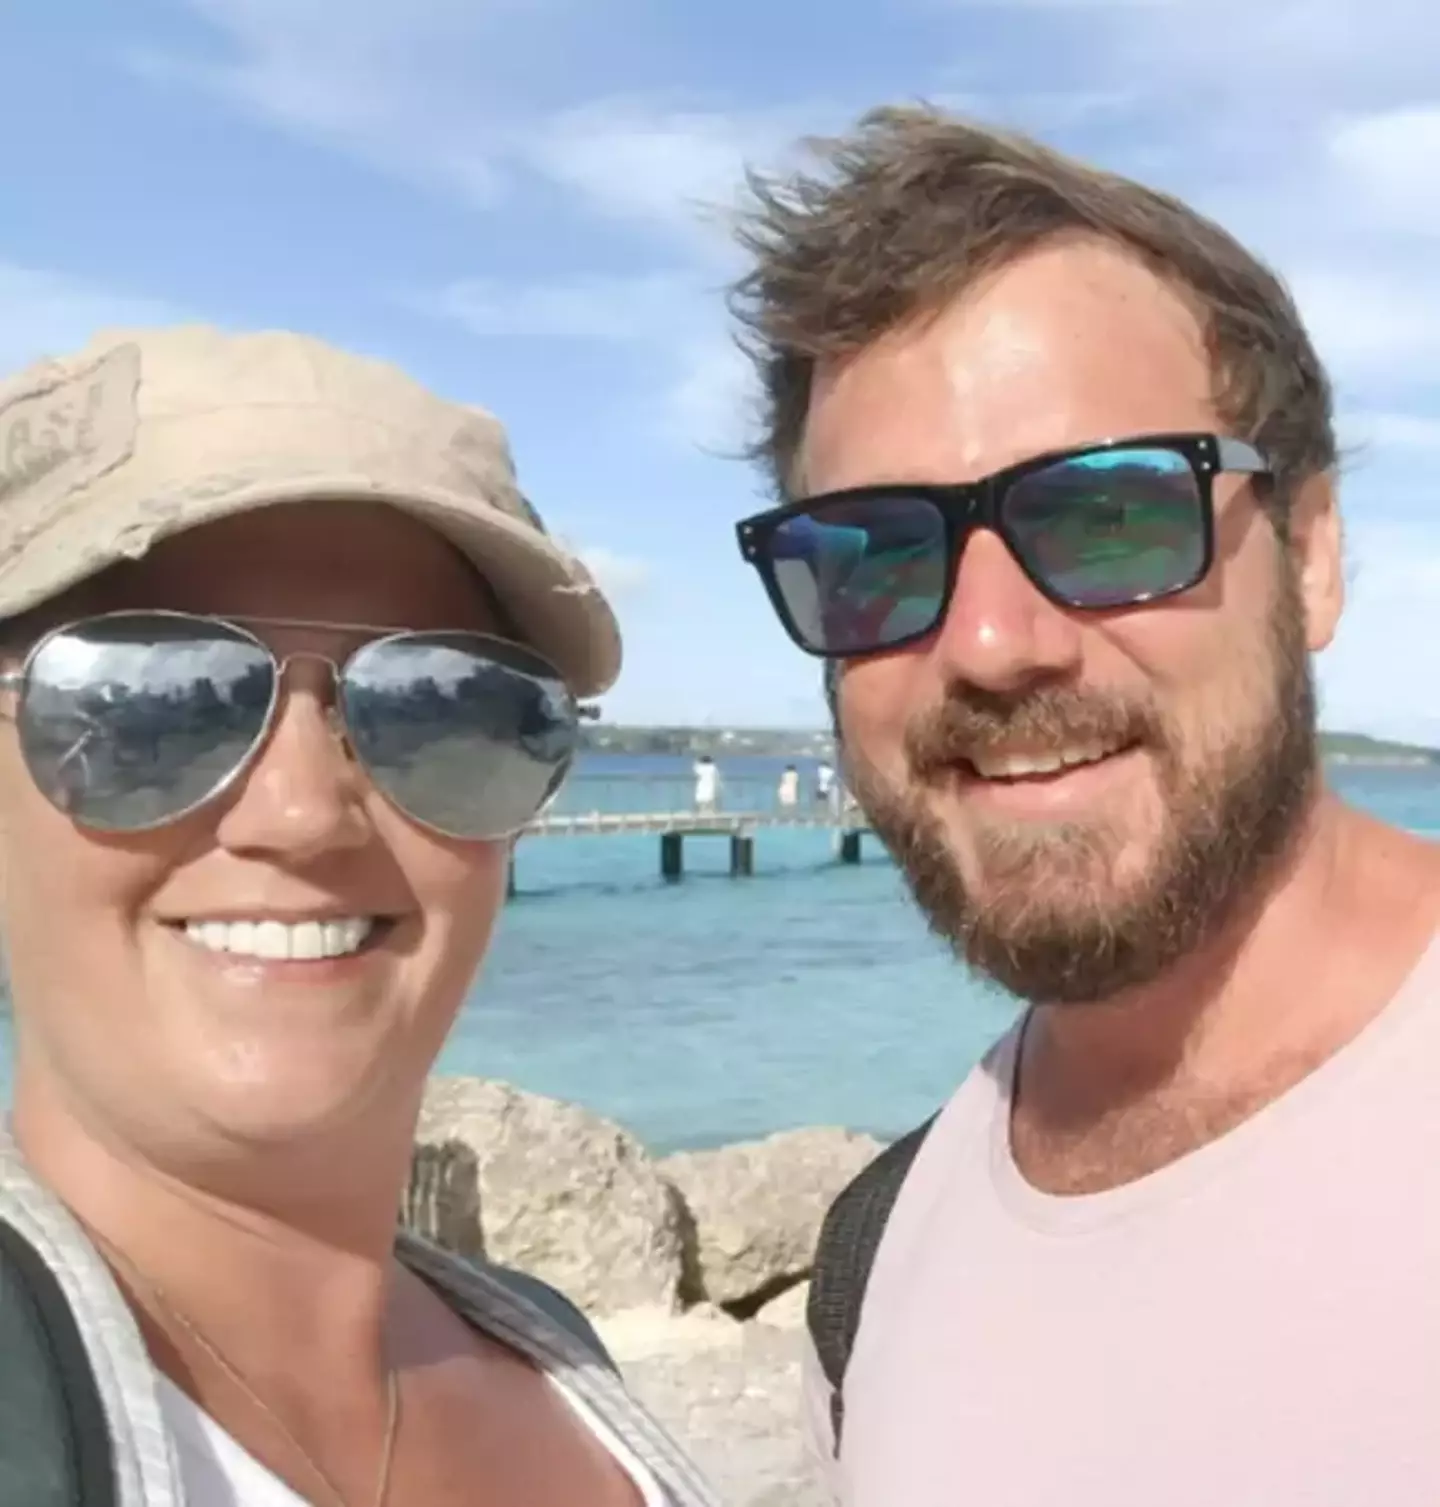 35-year-old Warwick Tollemache fell overboard a cruise ship last month, the search for his body has been called off.